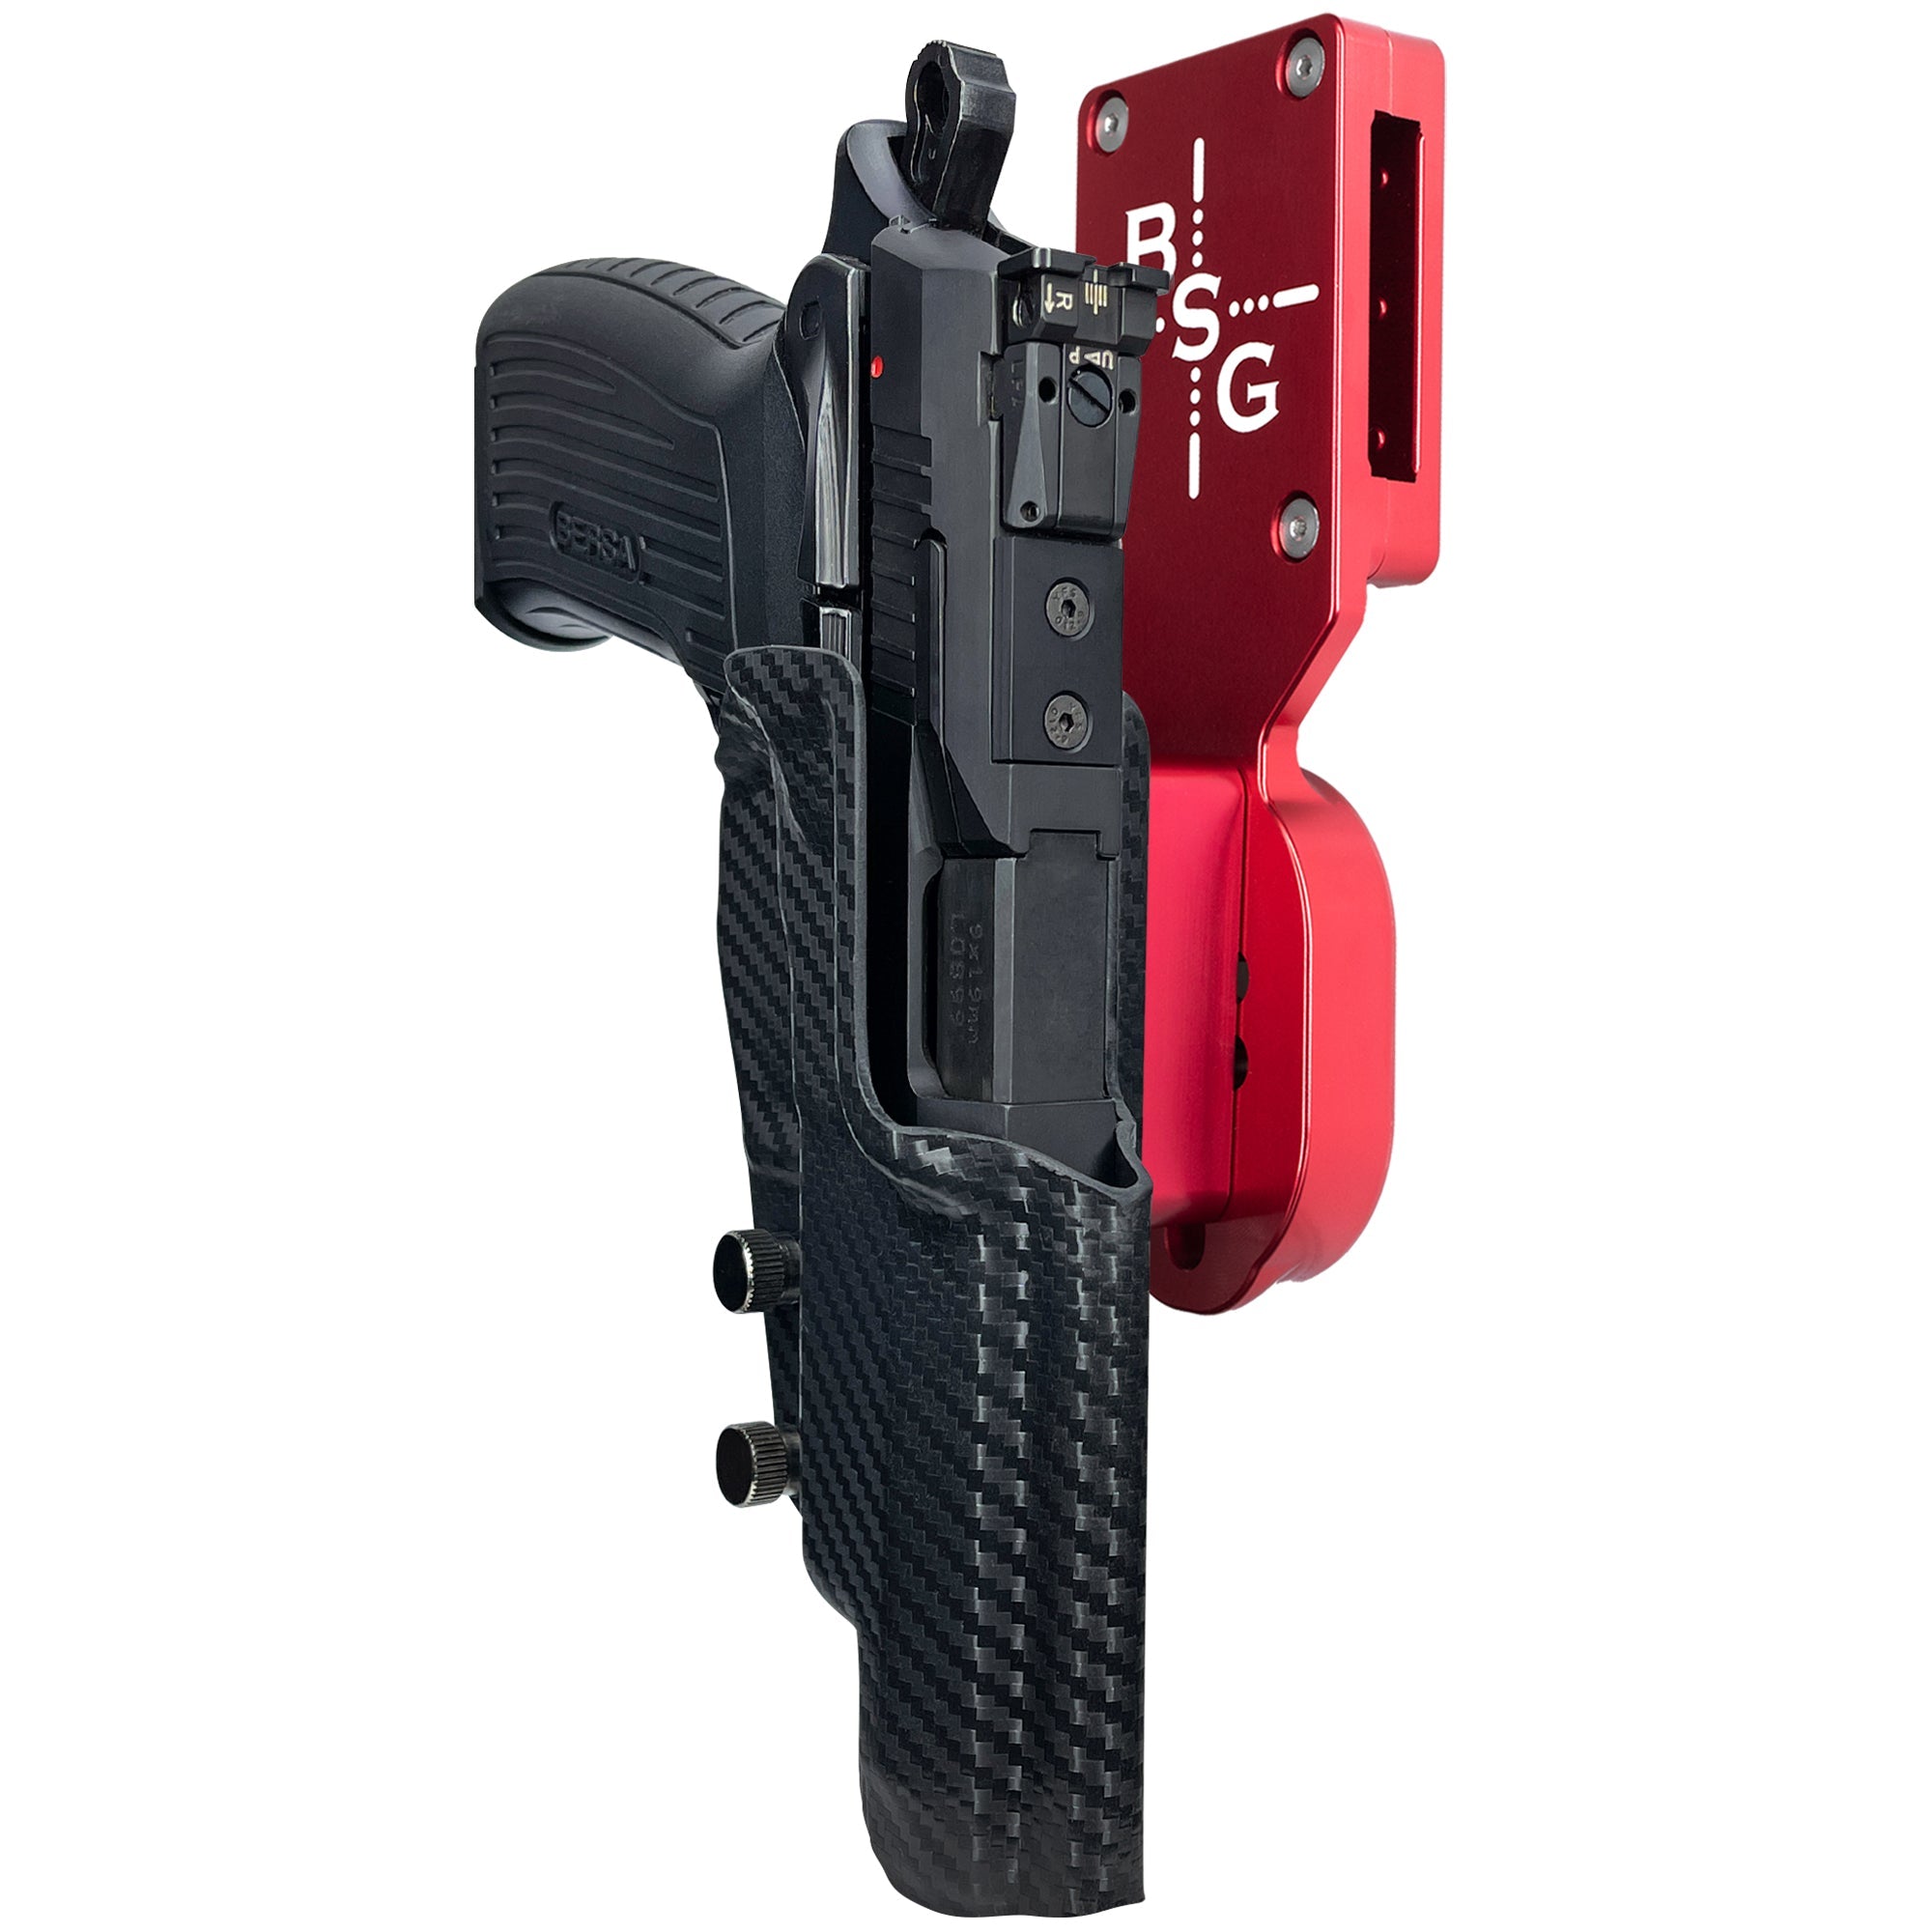 Bersa TPR9 XT Pro Heavy Duty Competition Holster in Red / Carbon Fiber